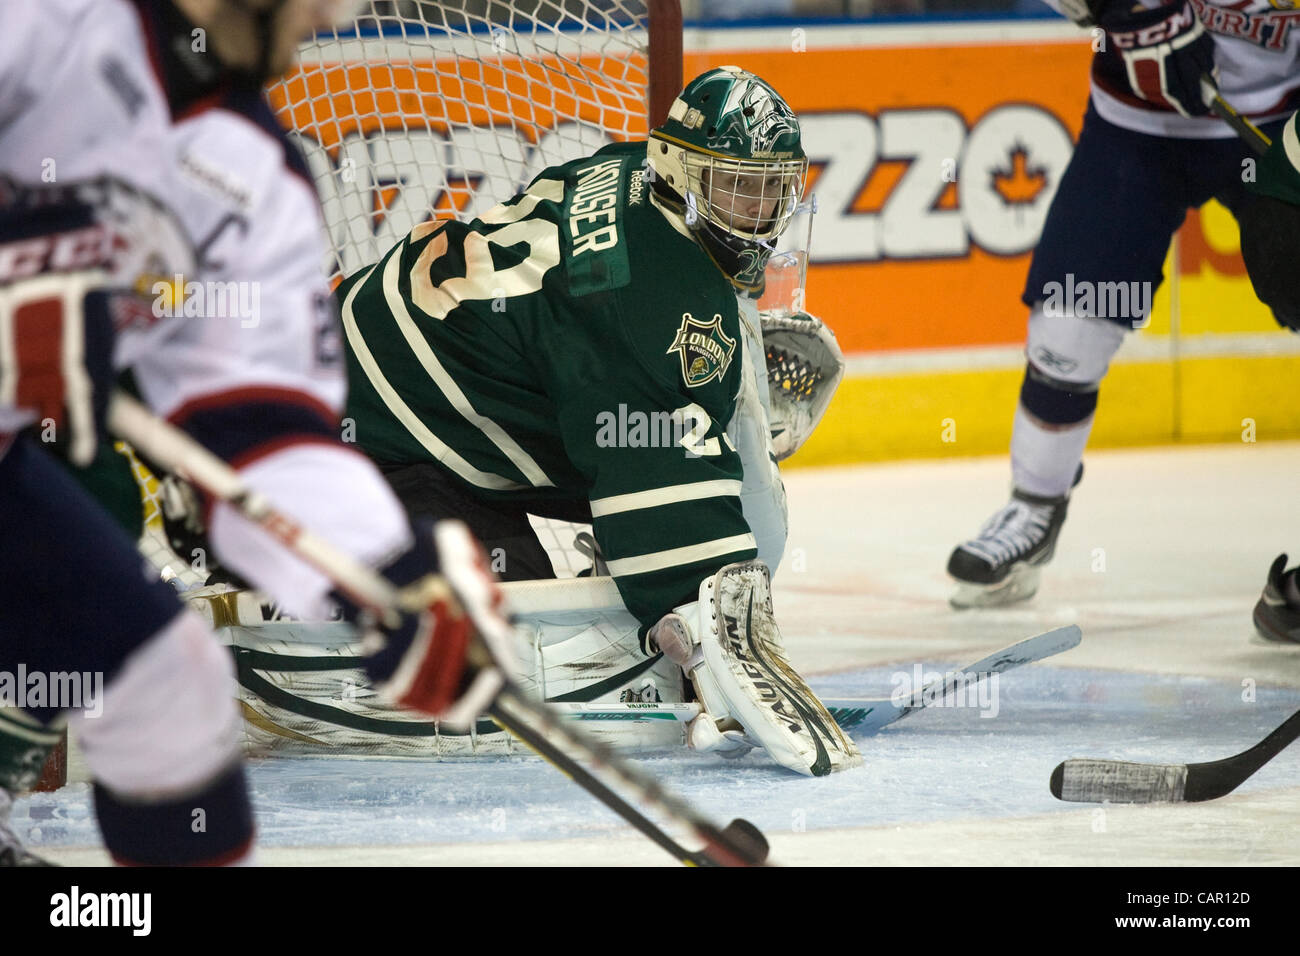 London Ontario, Canada - April 9, 2012. Michaeal Houser, goalie for the London Knights keeps an eye on the play around his net in the third period against the Saginaw Spirit. Saginaw defeated London 5-2 to take a 2-1 lead in the best of seven playoff series at the John Labatt Centre. Stock Photo